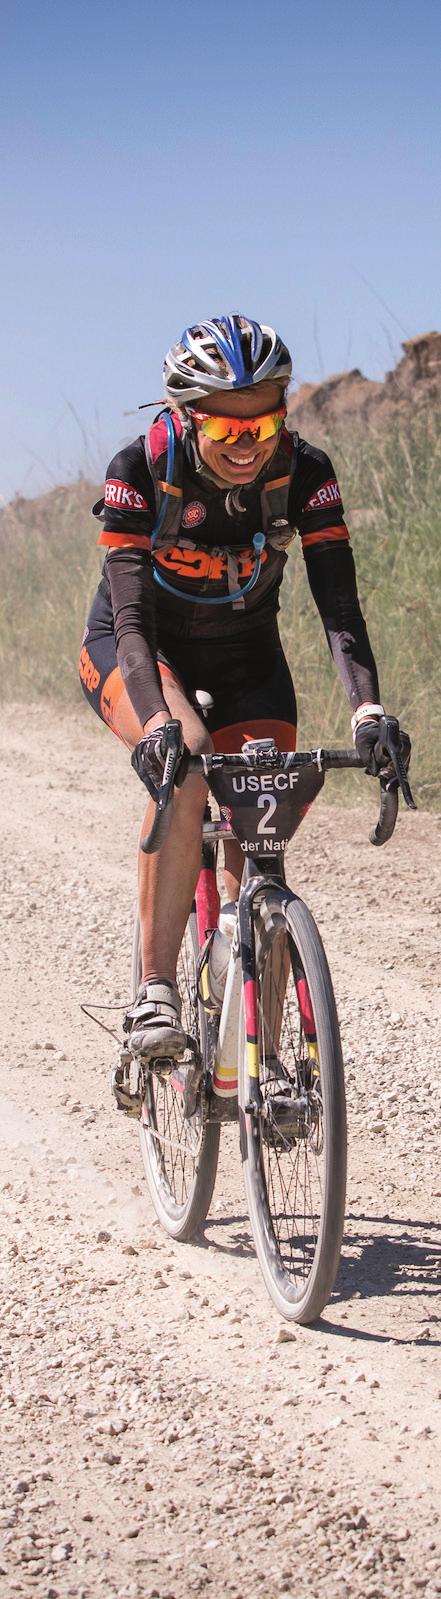 Racers do not need to qualify and any rider 16 years of age or older may register for the USECF Gravel Grinder National Championship.